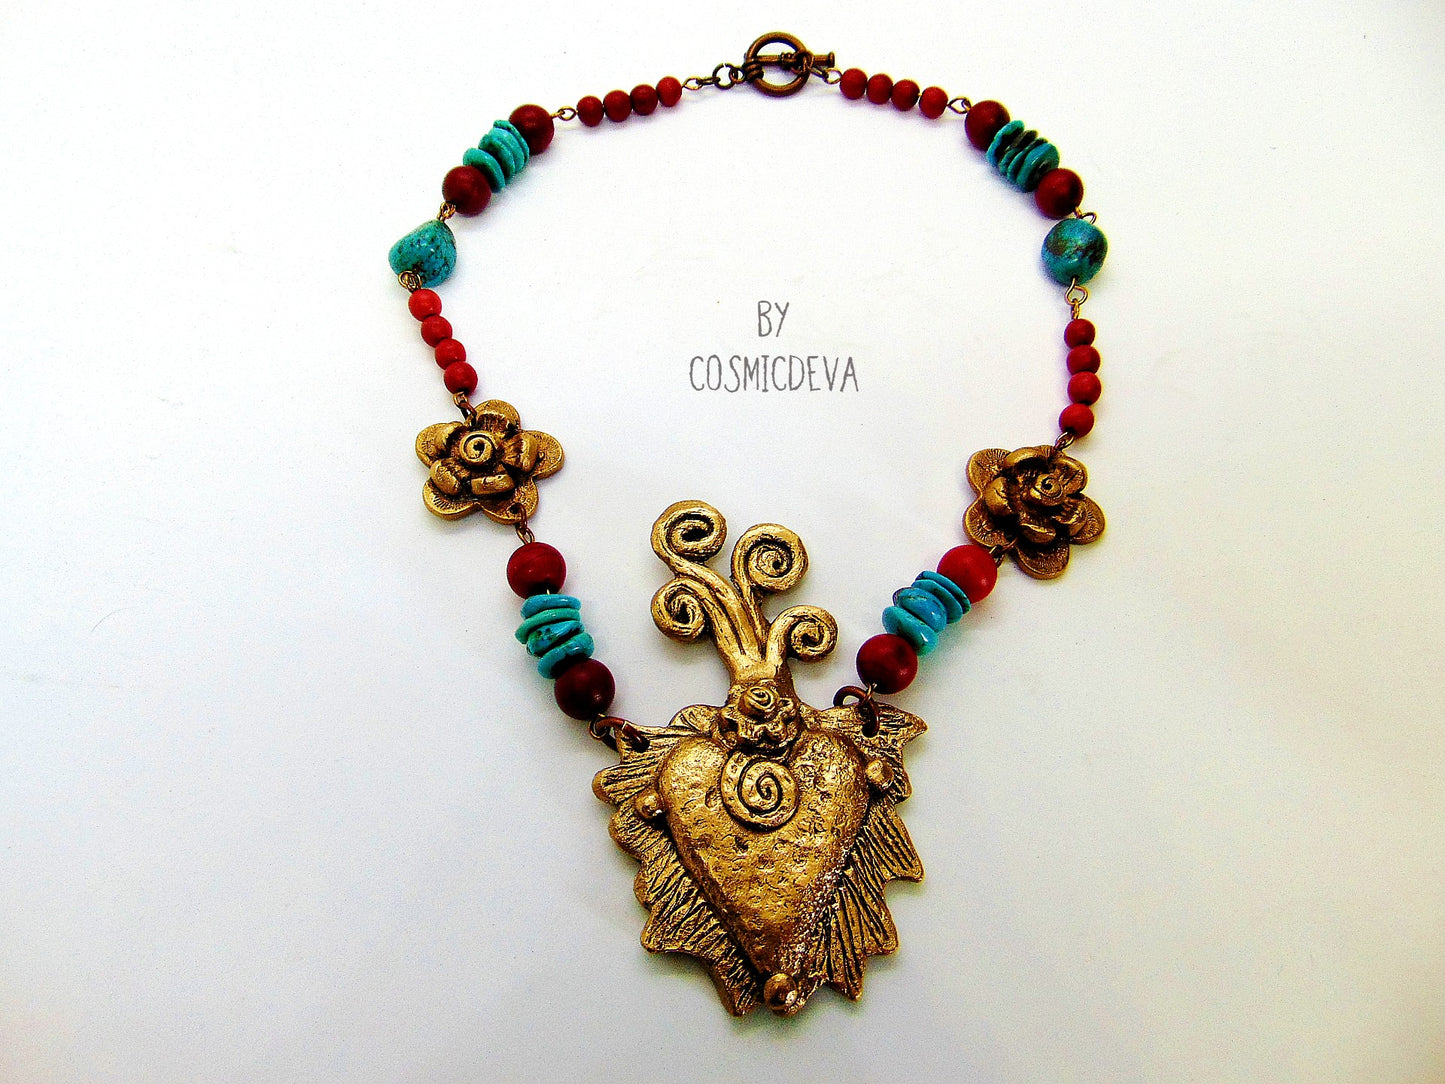 Gold Bronze Milagro Heart  Sacred Heart Necklace Set. Stunning bold one of a kind hand sculptured solid golden bronze milagro heart and flower necklace set with natural turquoise, red howlite gemstone beads was kiln fired in my studio with pure Bronze from Bronze Metal Clay.   This necklace comes with a matching pair of ear rings - CosmicDeva